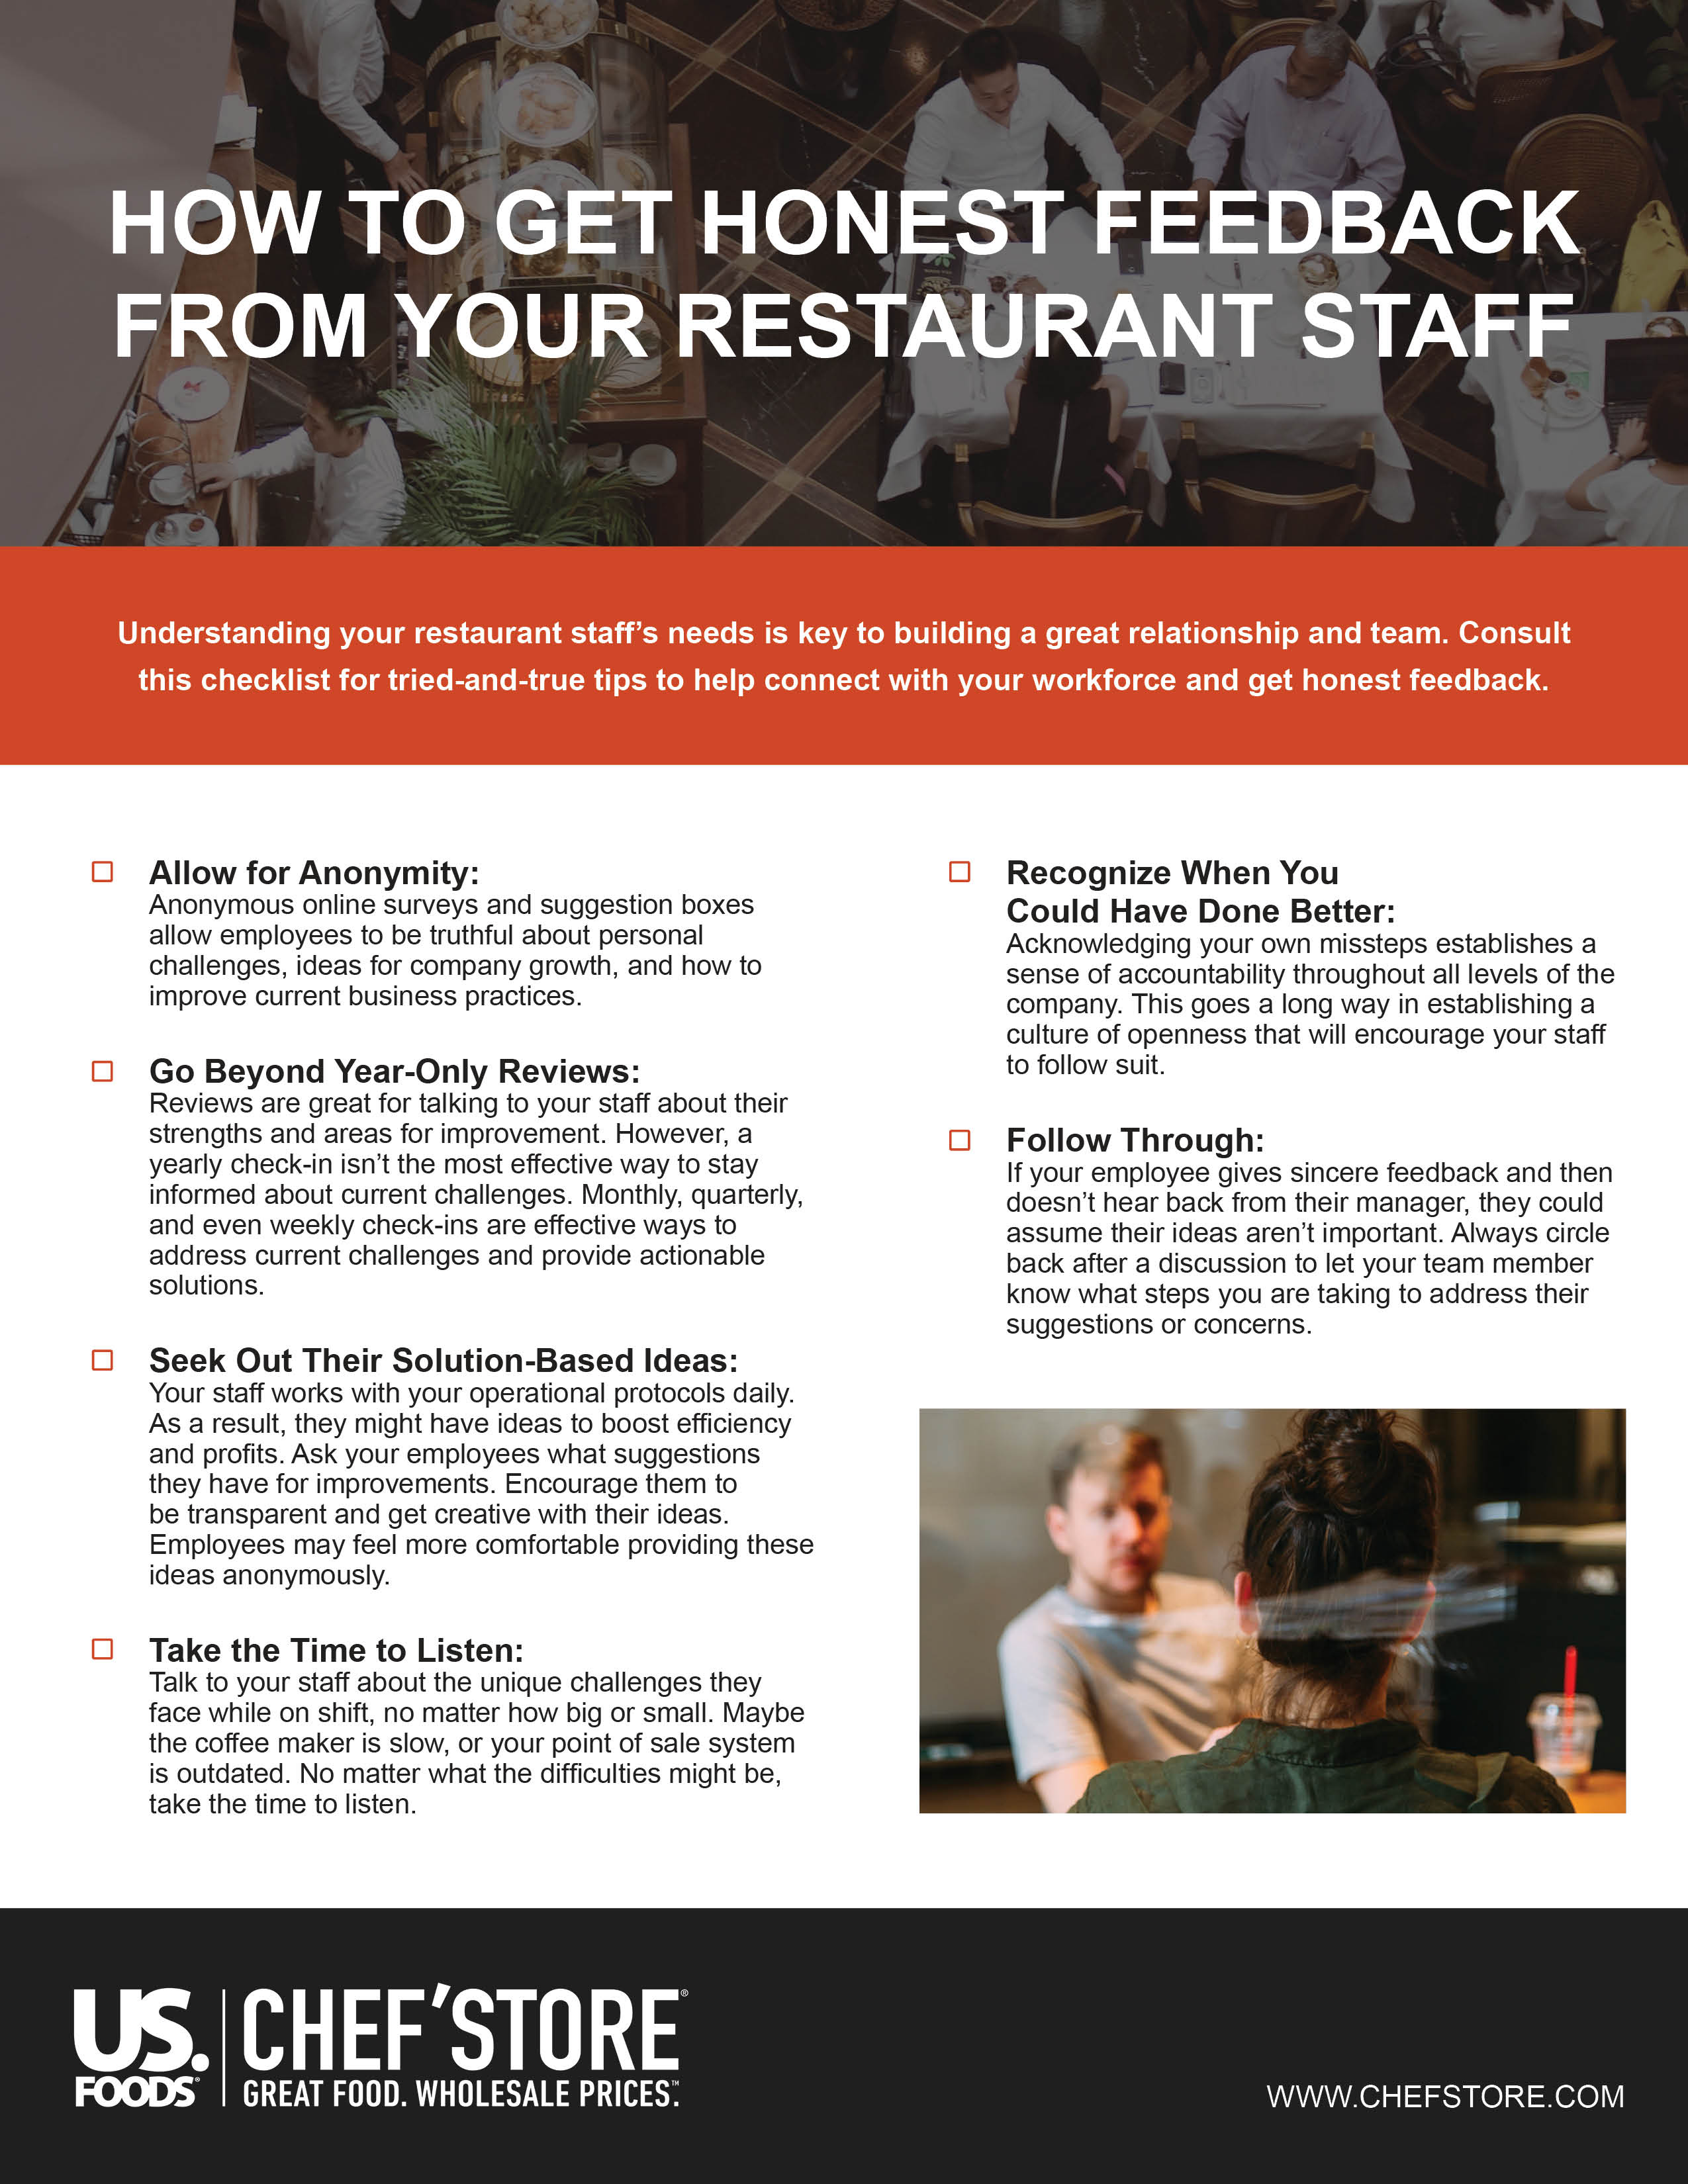 How To Get Honest Feedback From Your Restaurant Staff